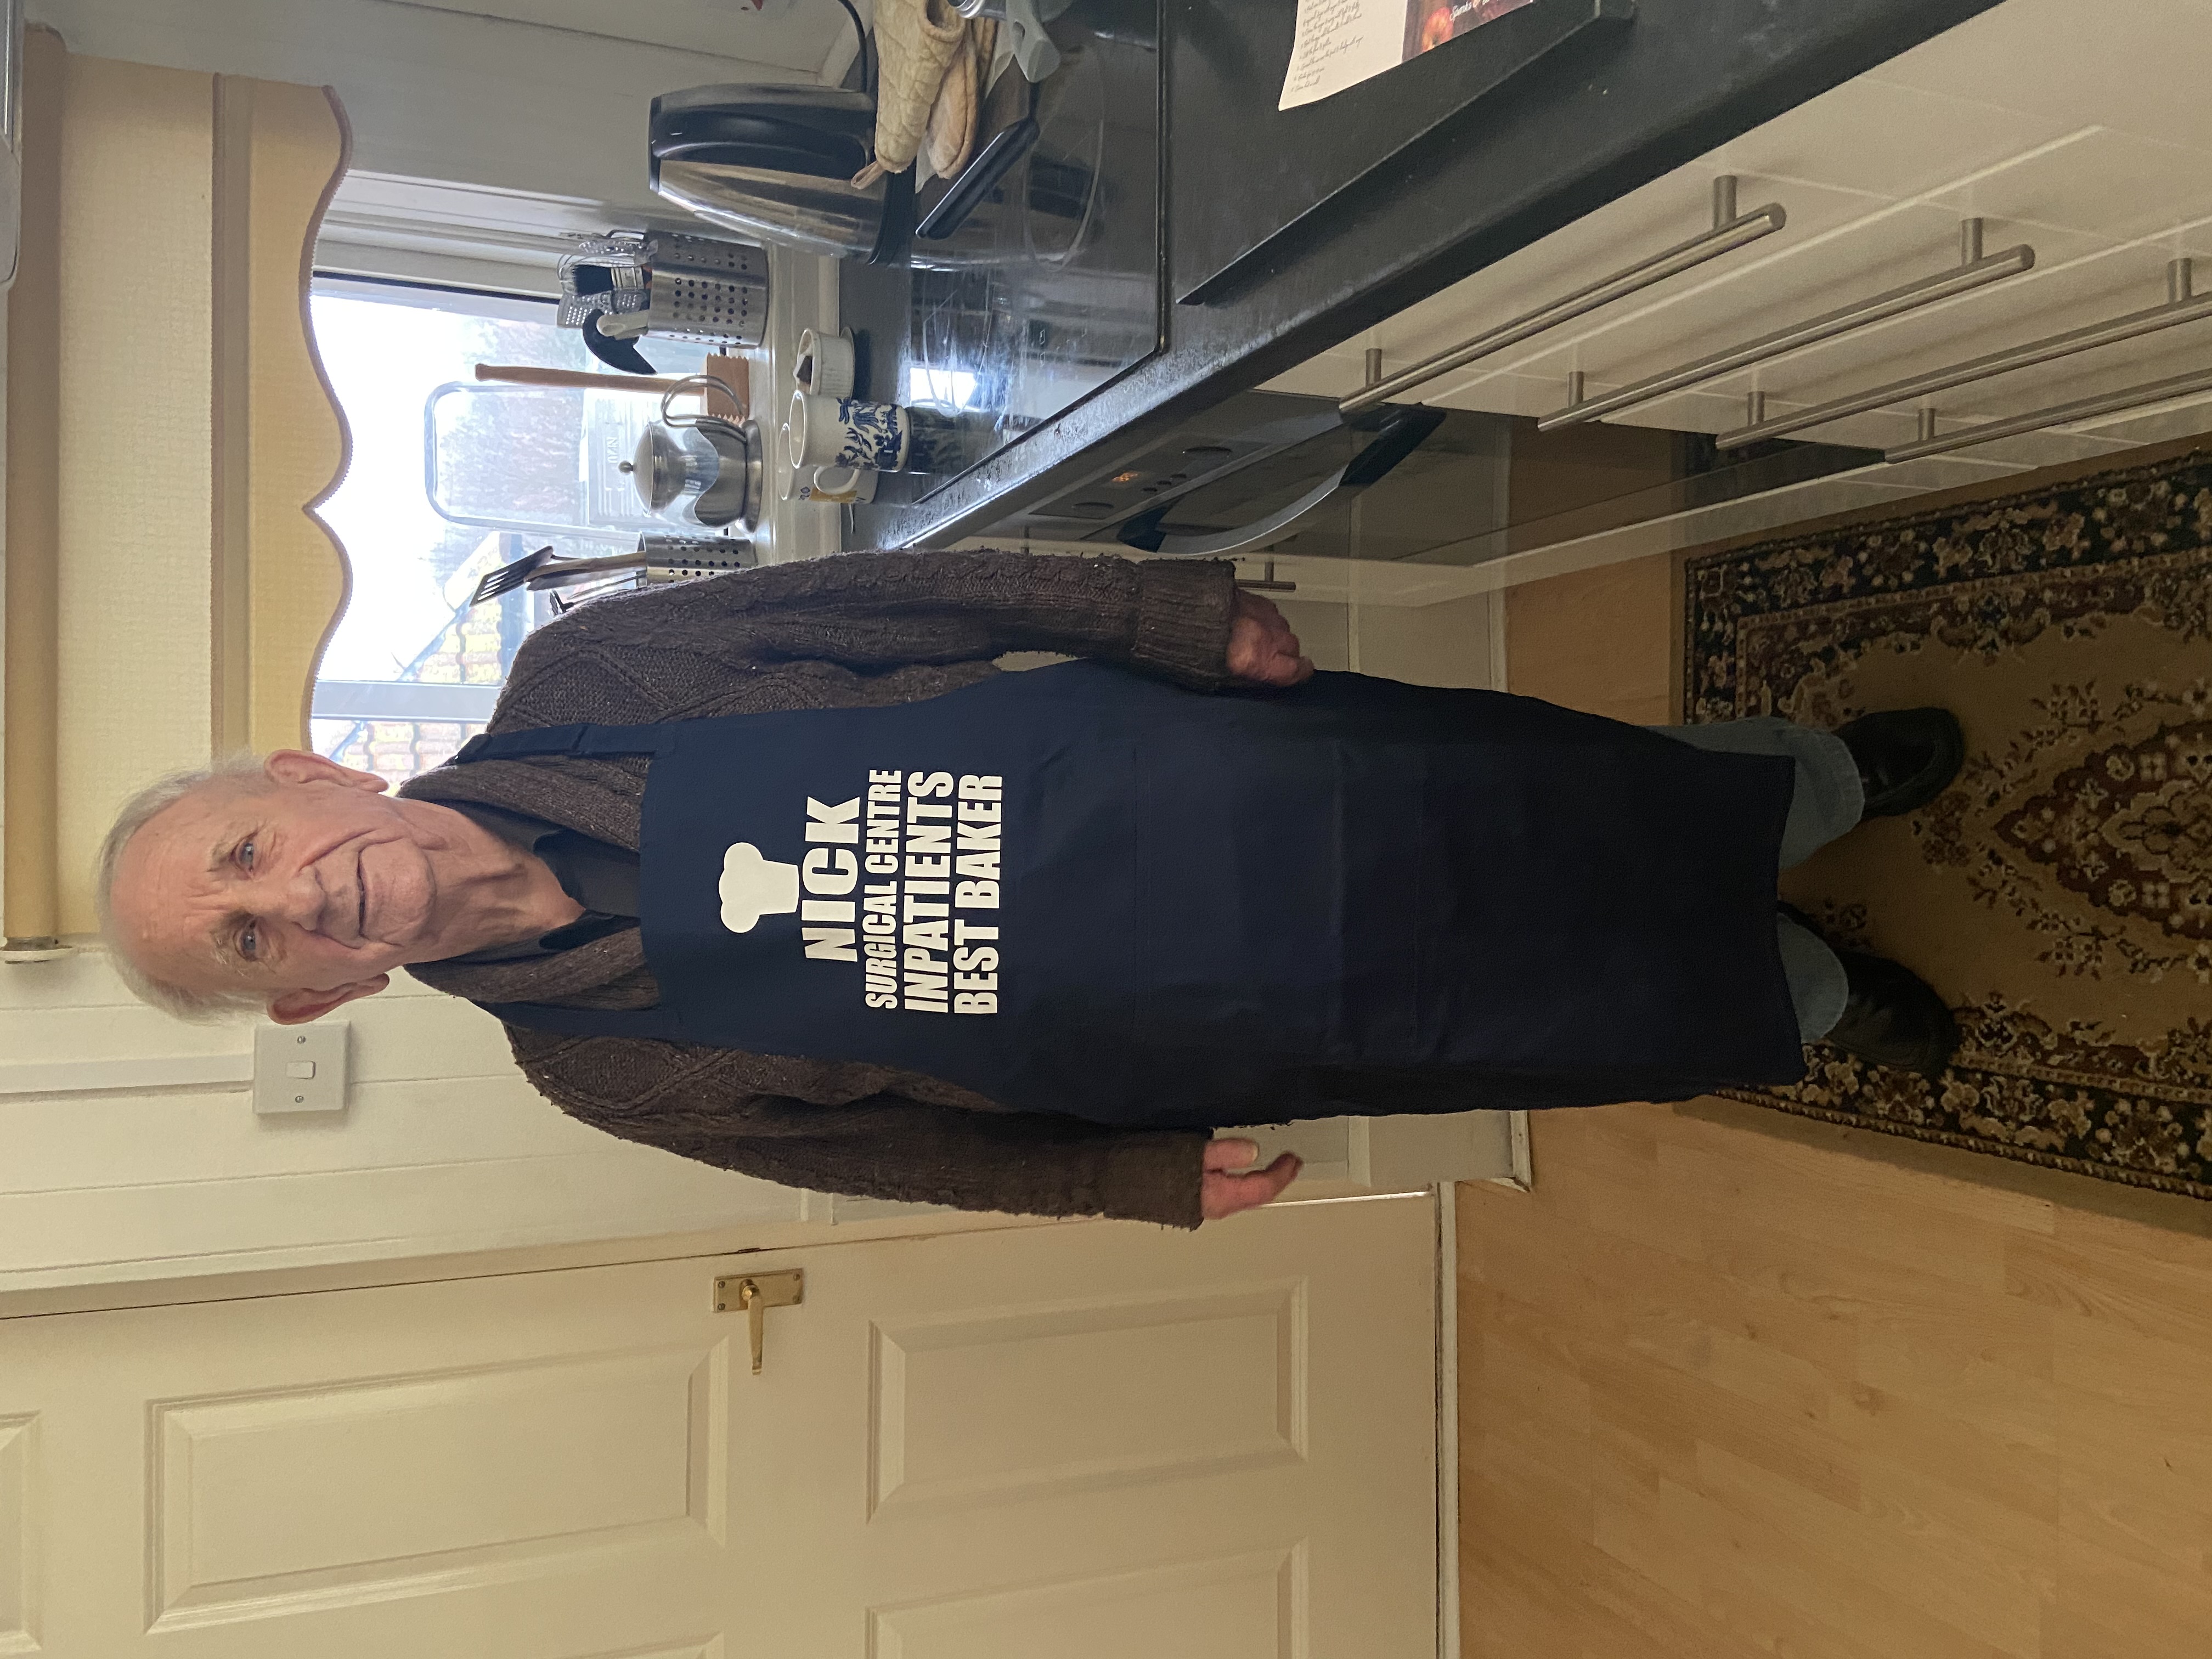 Nick Cunningham wearing the apron his friends at South Tyneside District Hospital's SCIP ward gifted to him..jpg